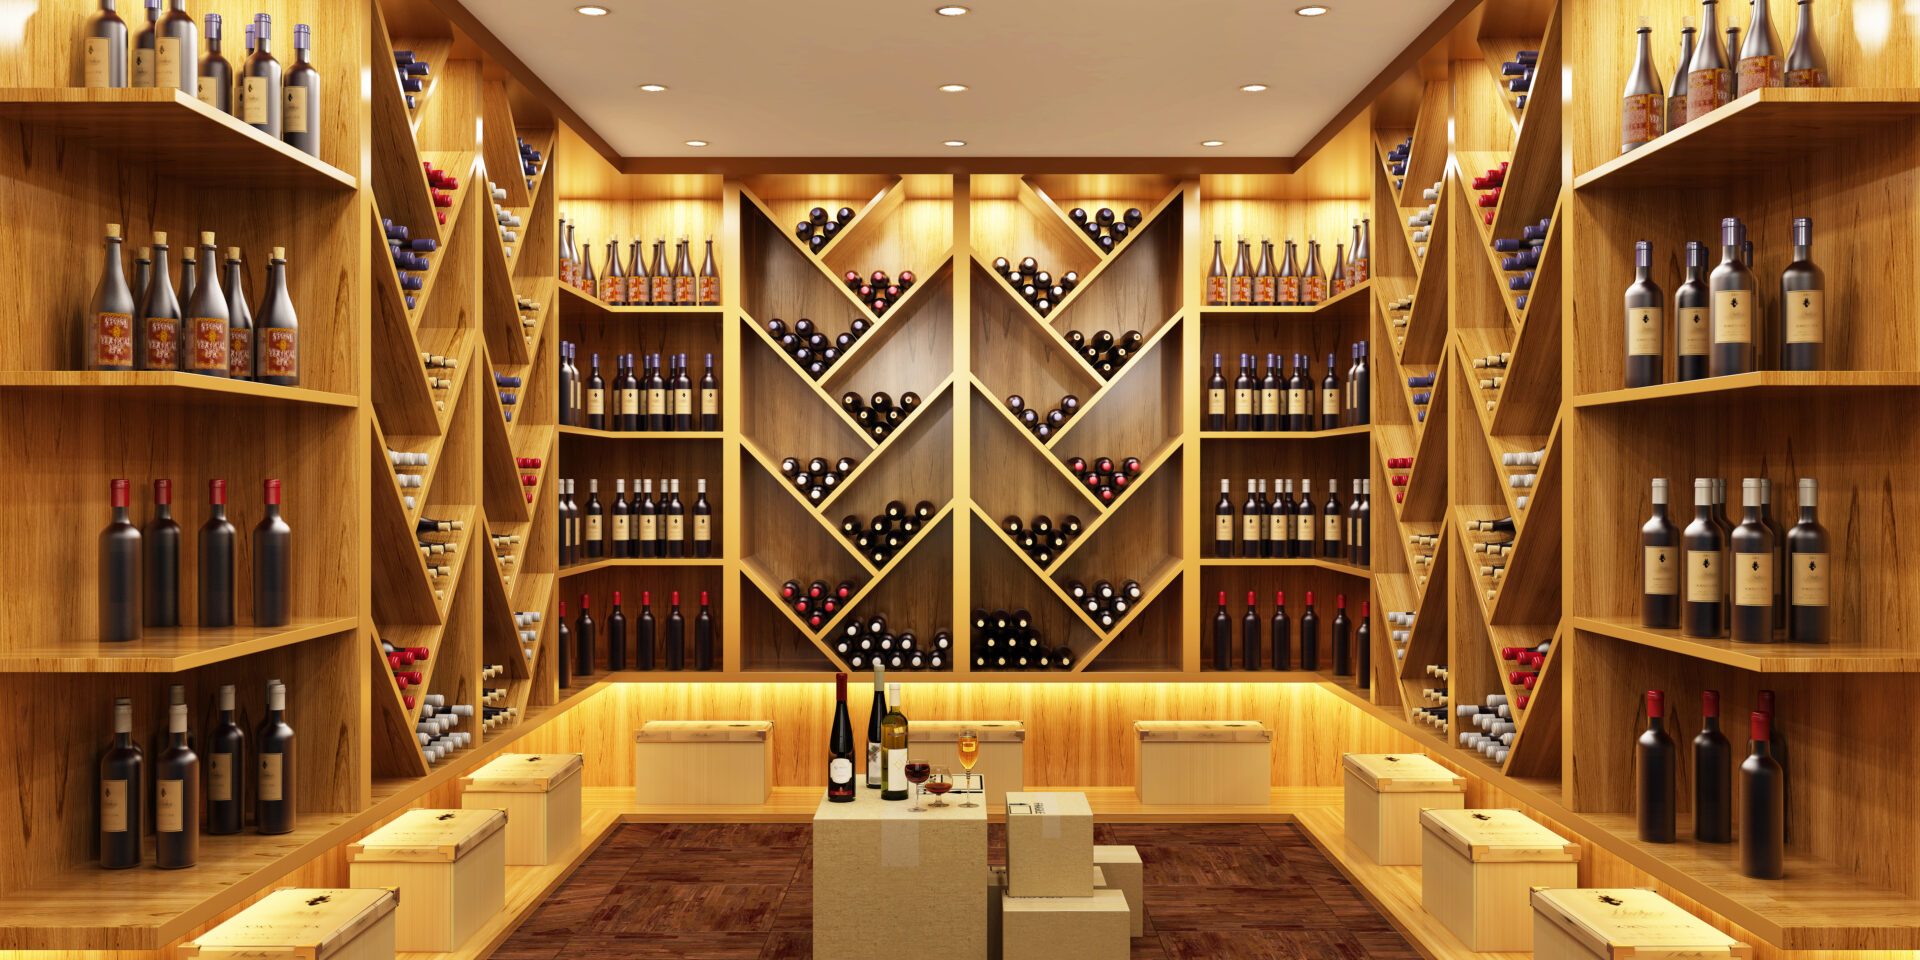 A room with many shelves of wine bottles.